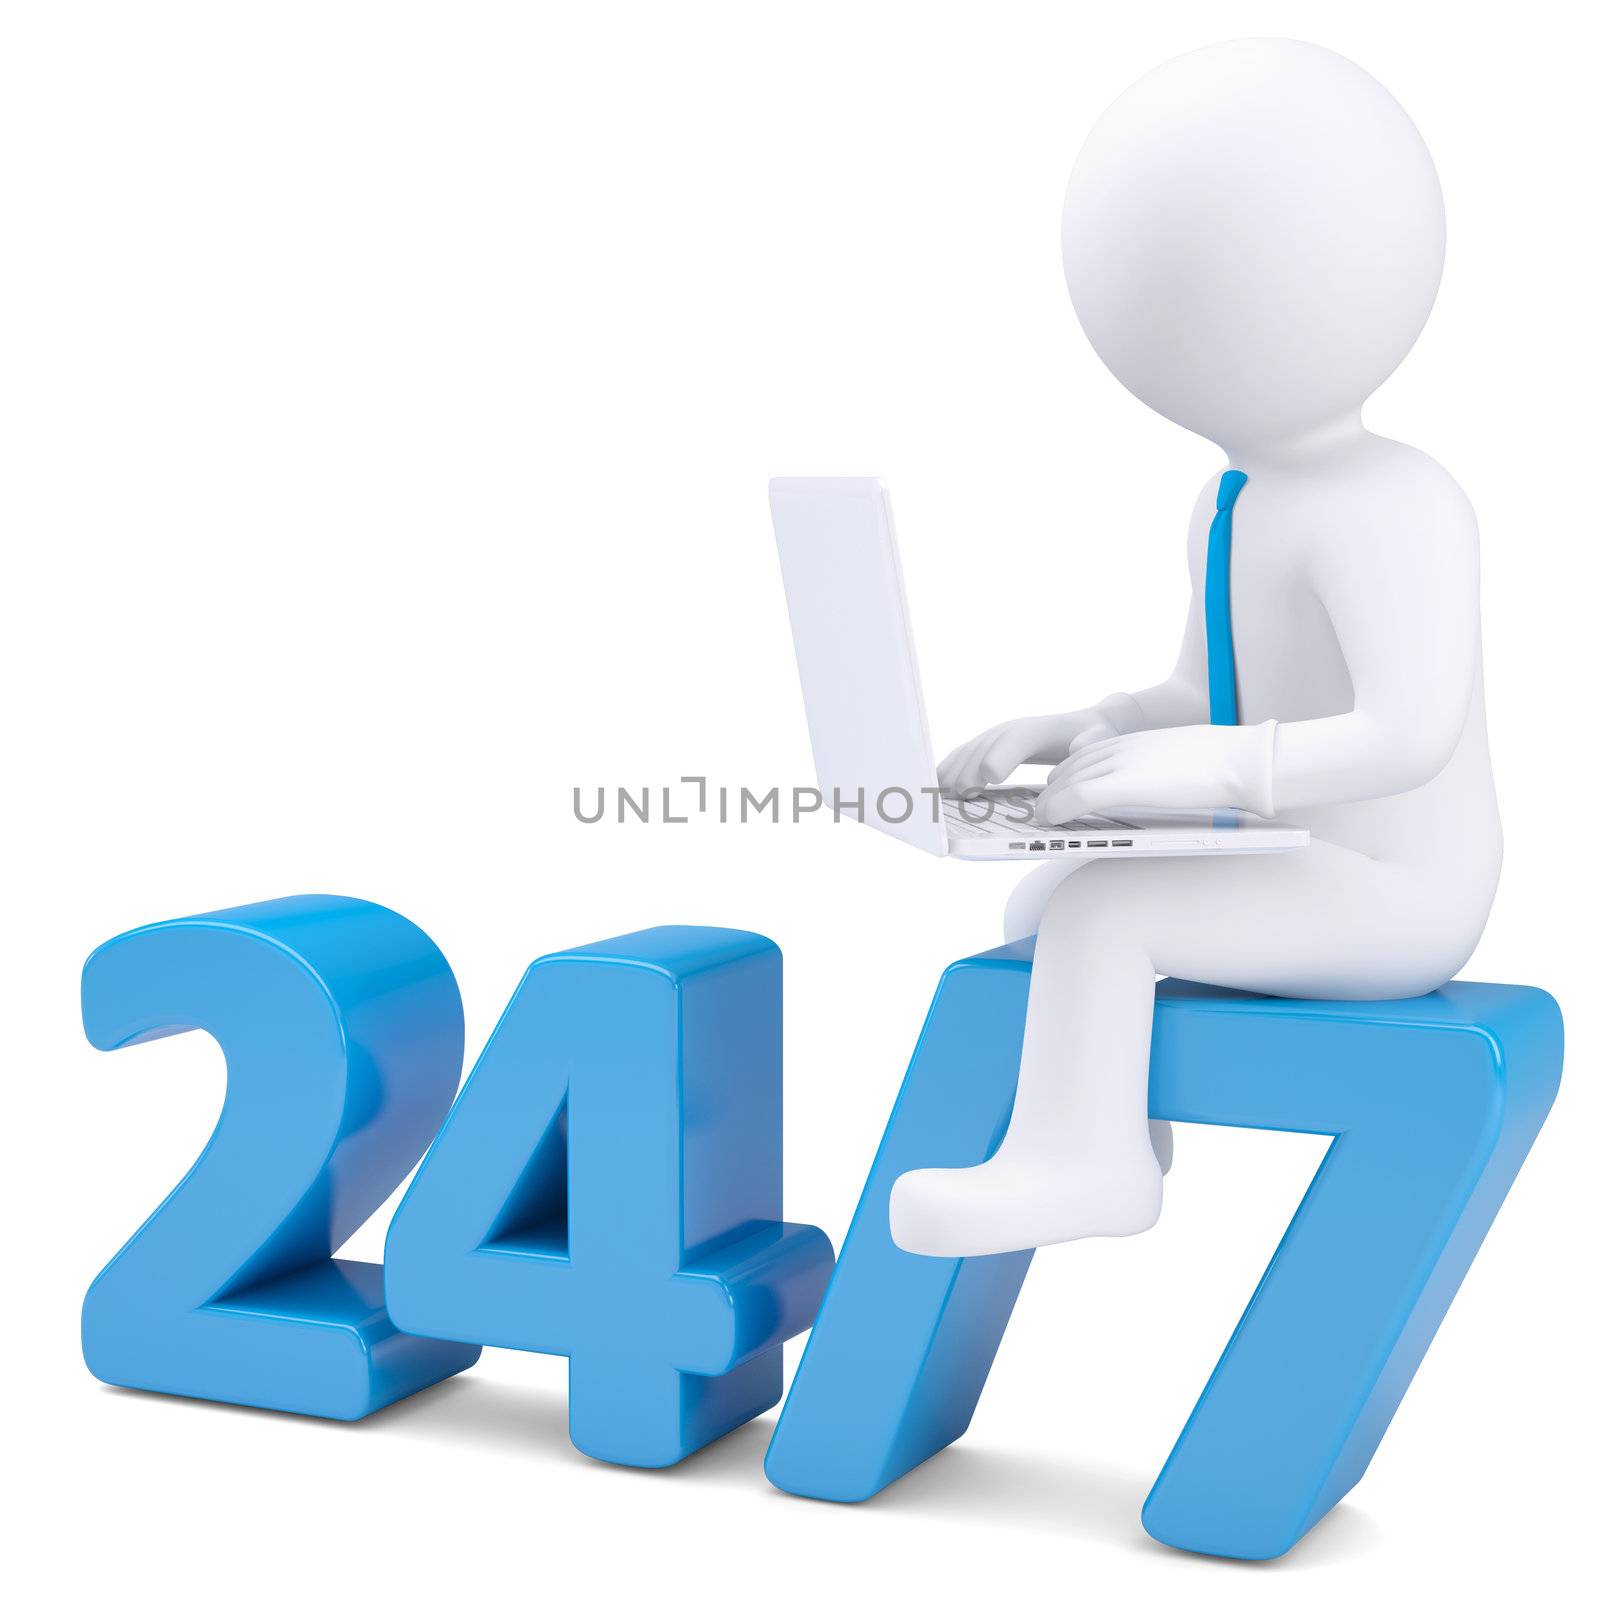 3d white man with laptop sitting on the numbers 24/7. Isolated render on a white background